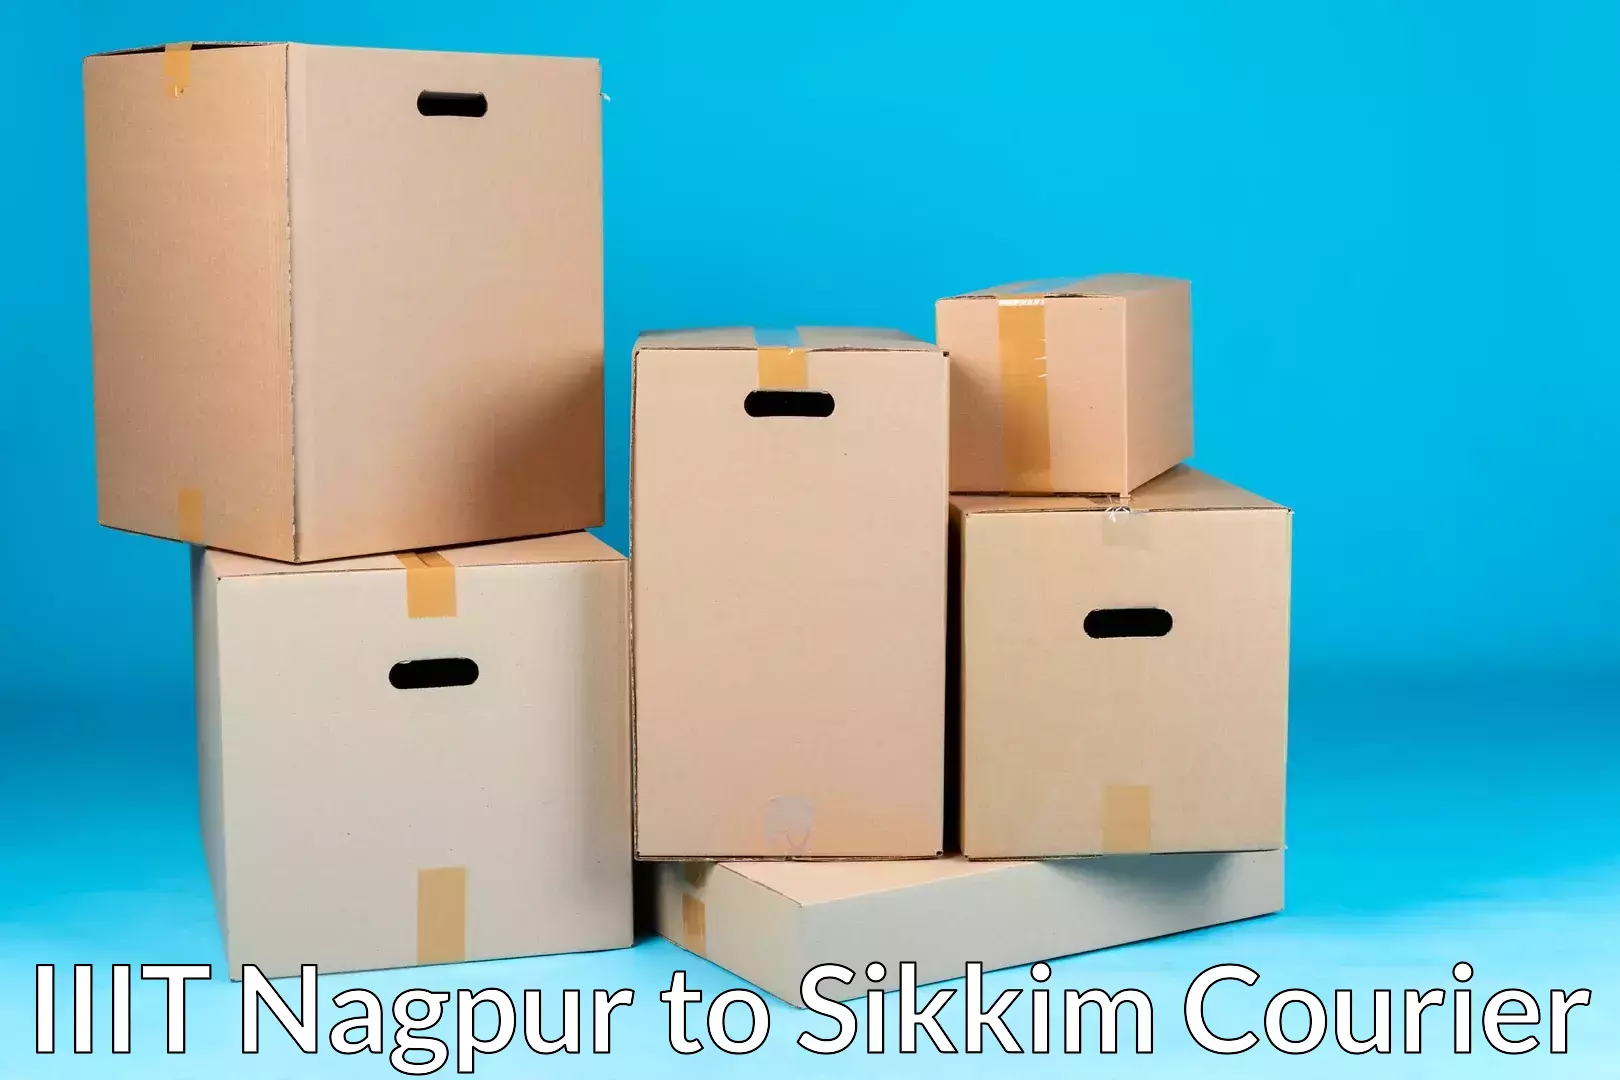 Household transport experts IIIT Nagpur to Sikkim